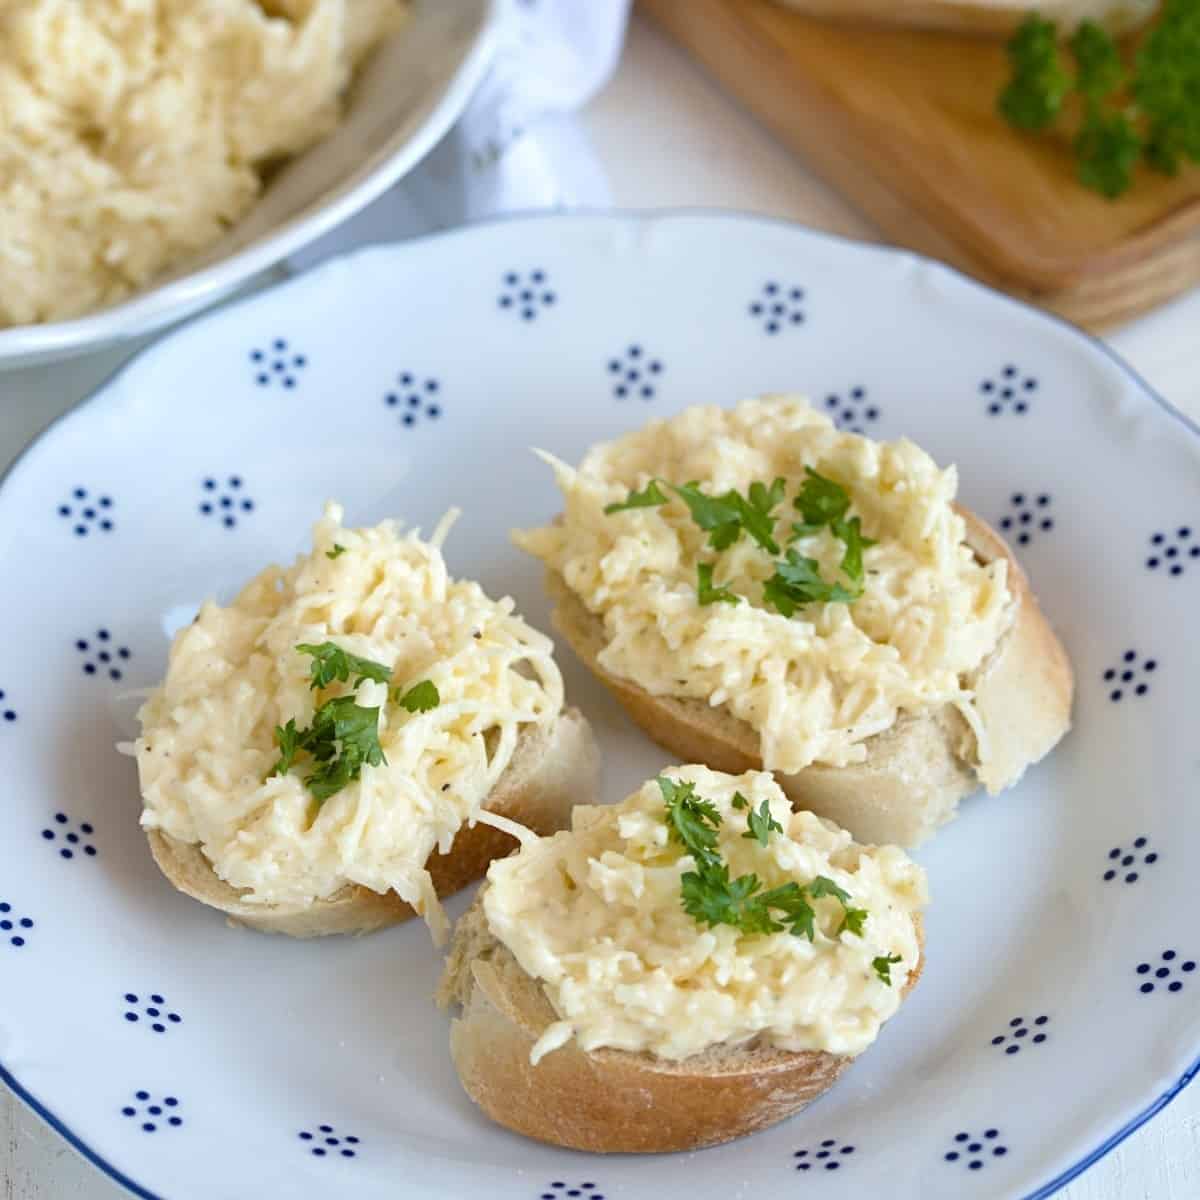 Czech style garlic cheese spread served on white bread, sprinkled with green parsley. 